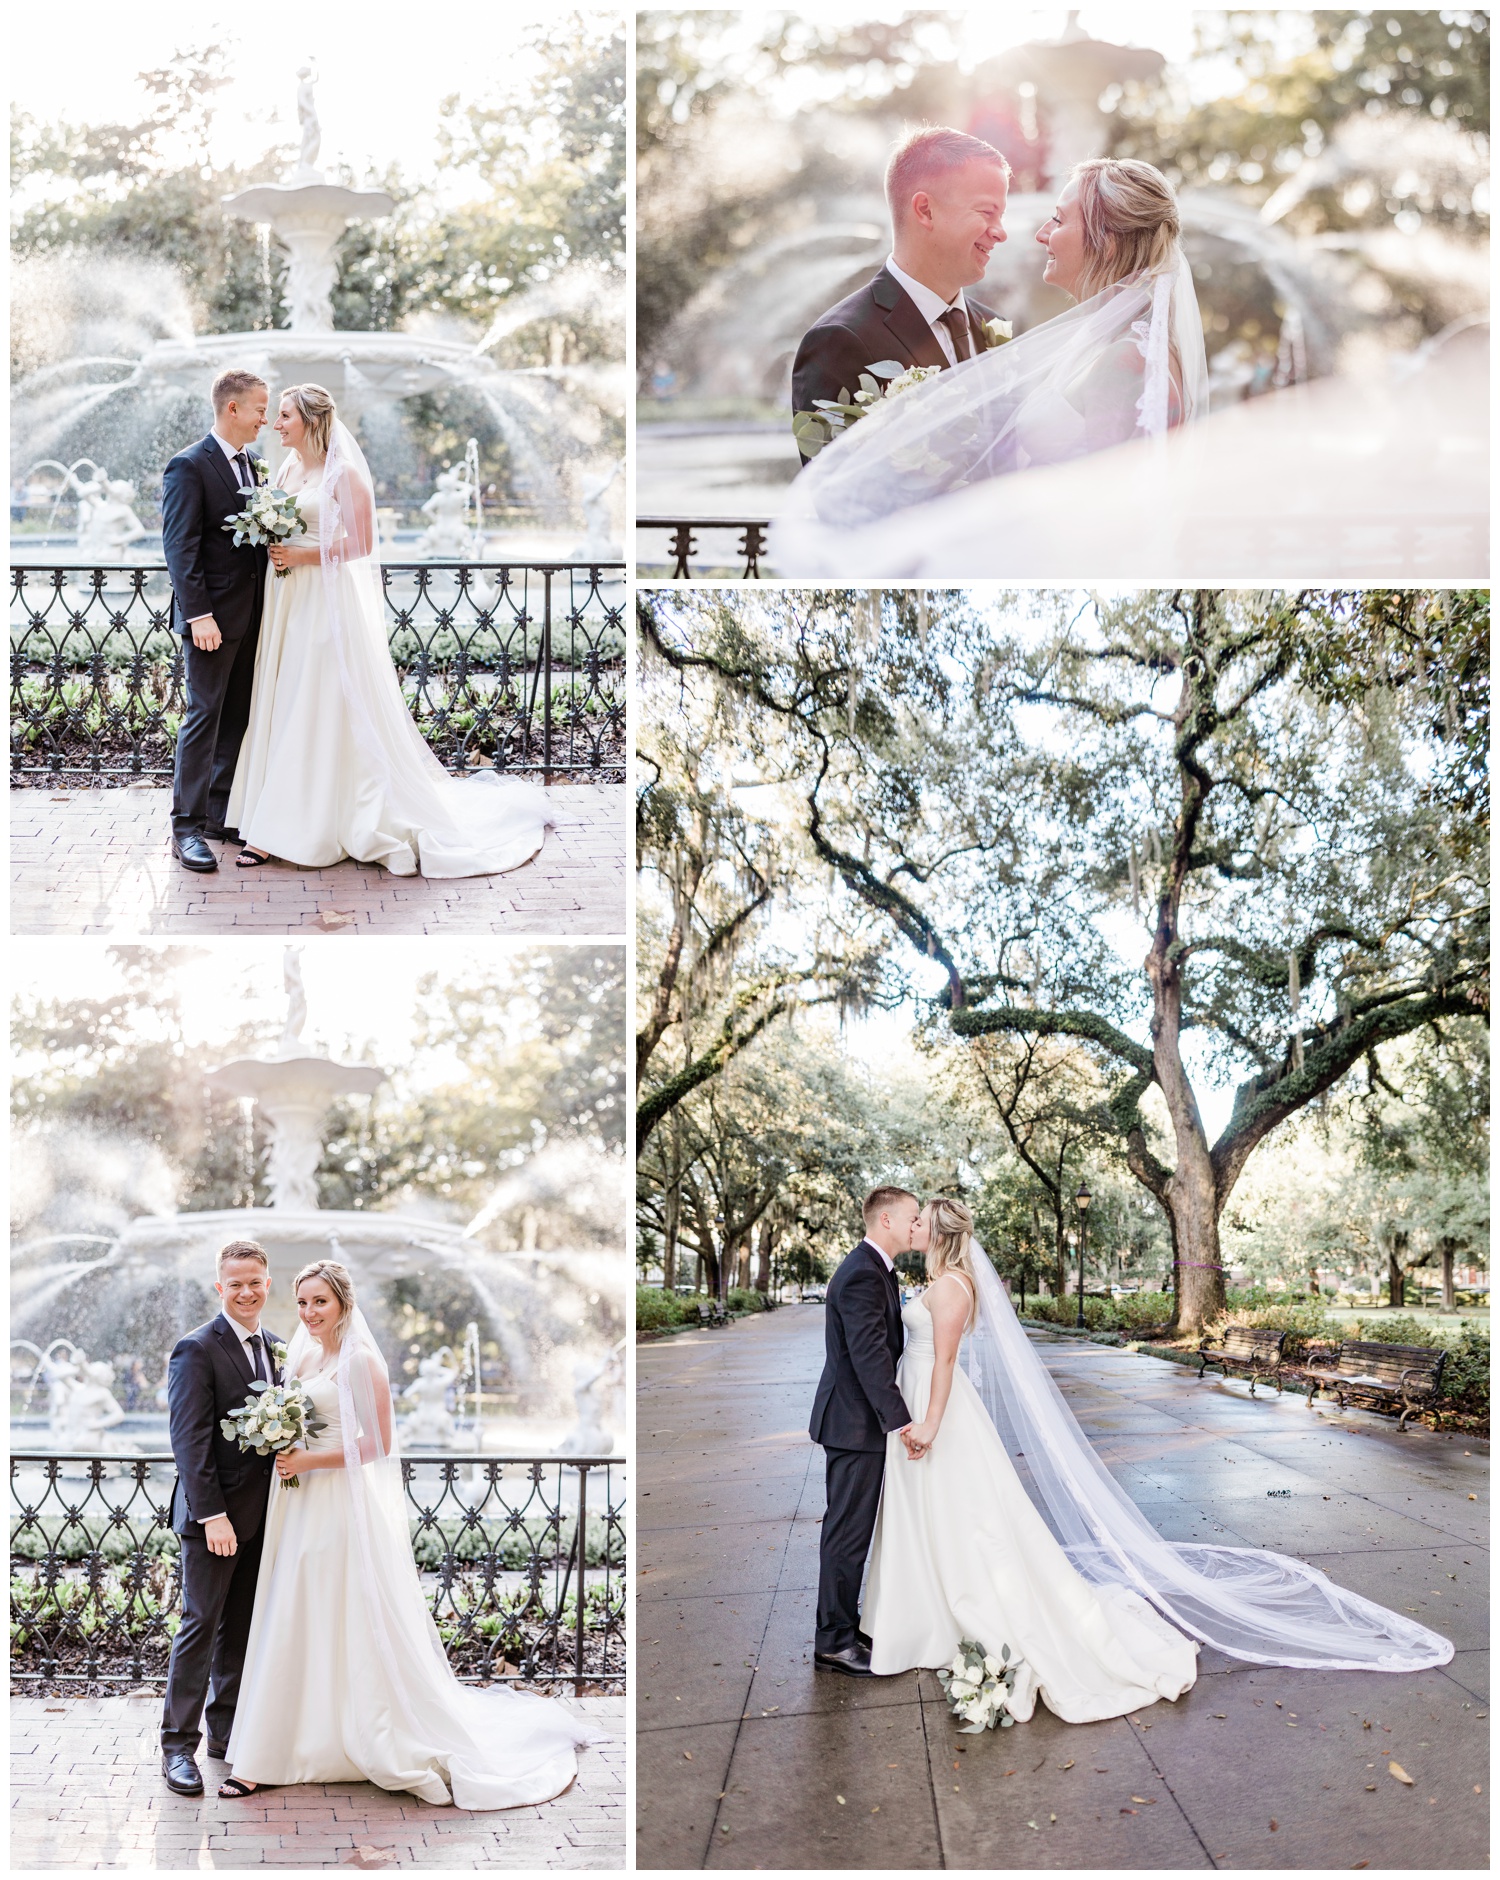 Couples portraits - Eloping at Whitefield Square - the savannah elopement package